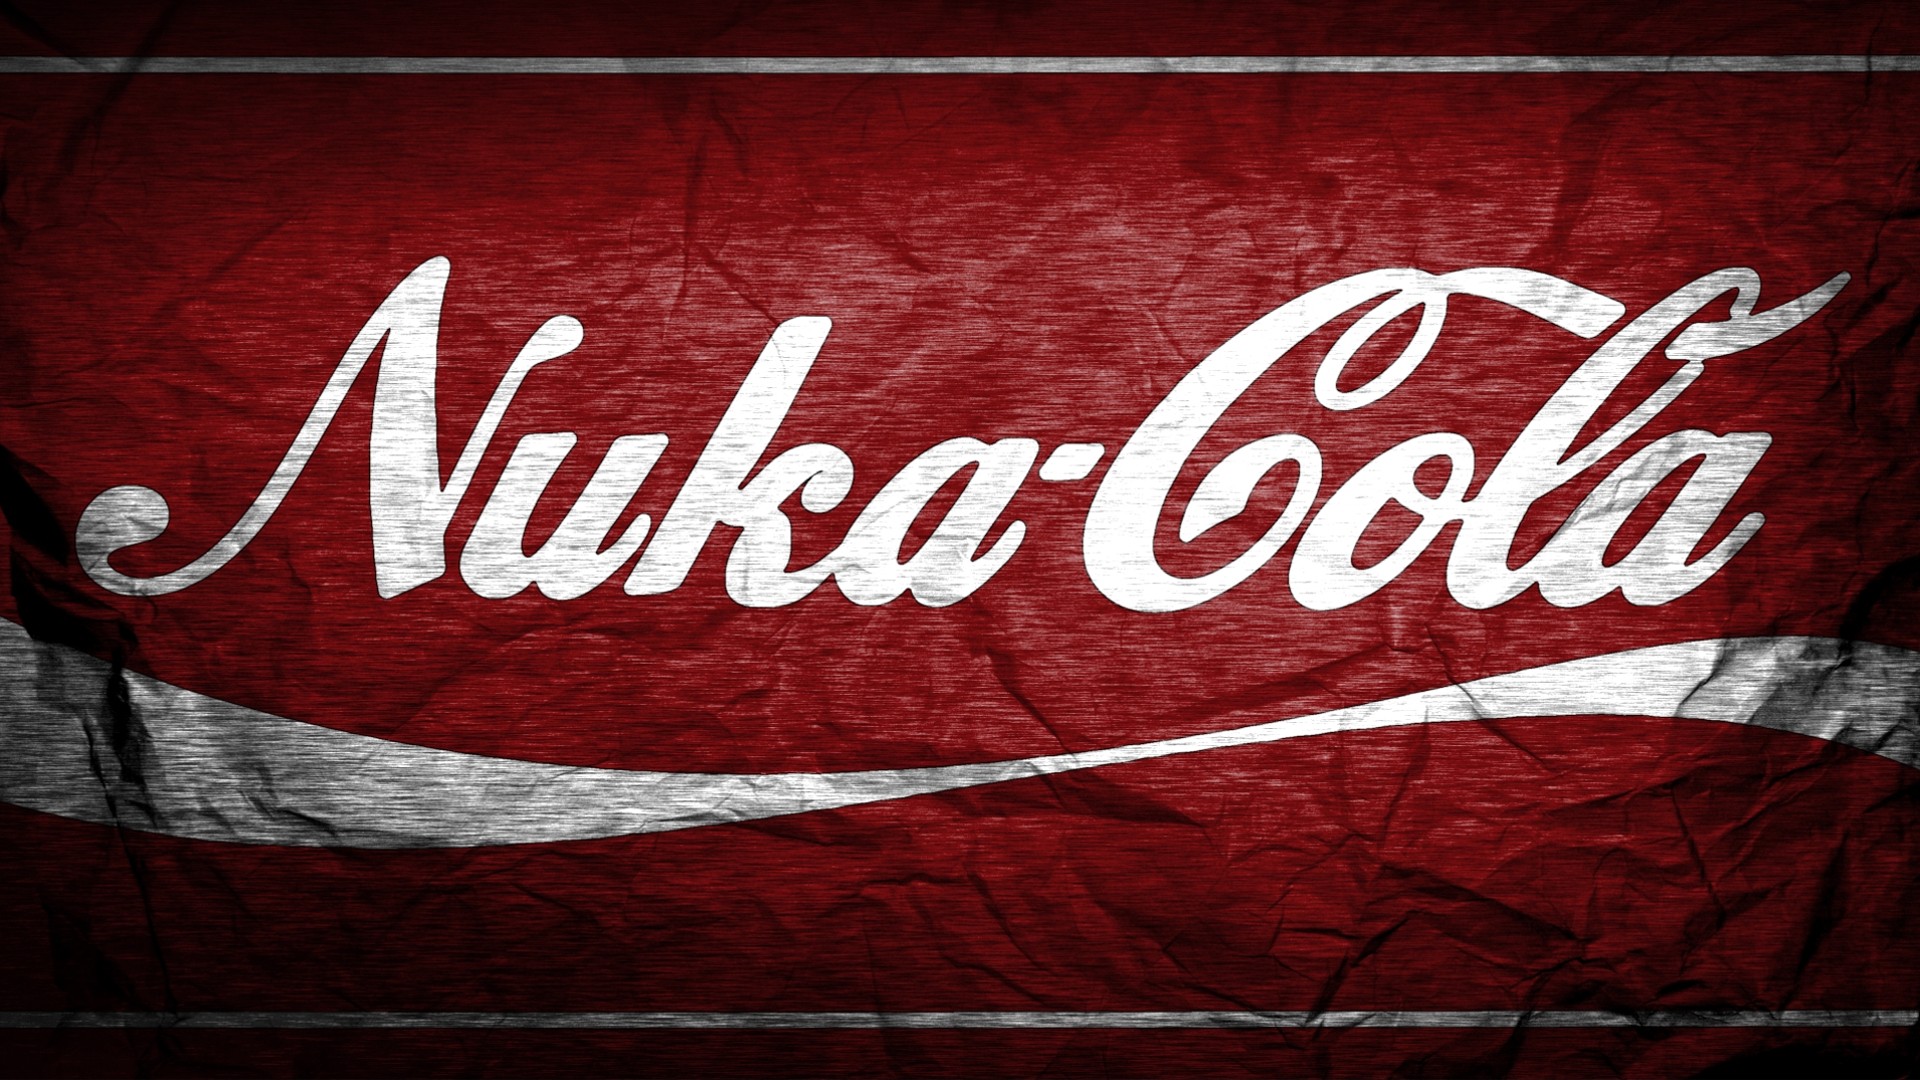 General 1920x1080 Fallout 4 video games video game art Nuka-Cola PC gaming